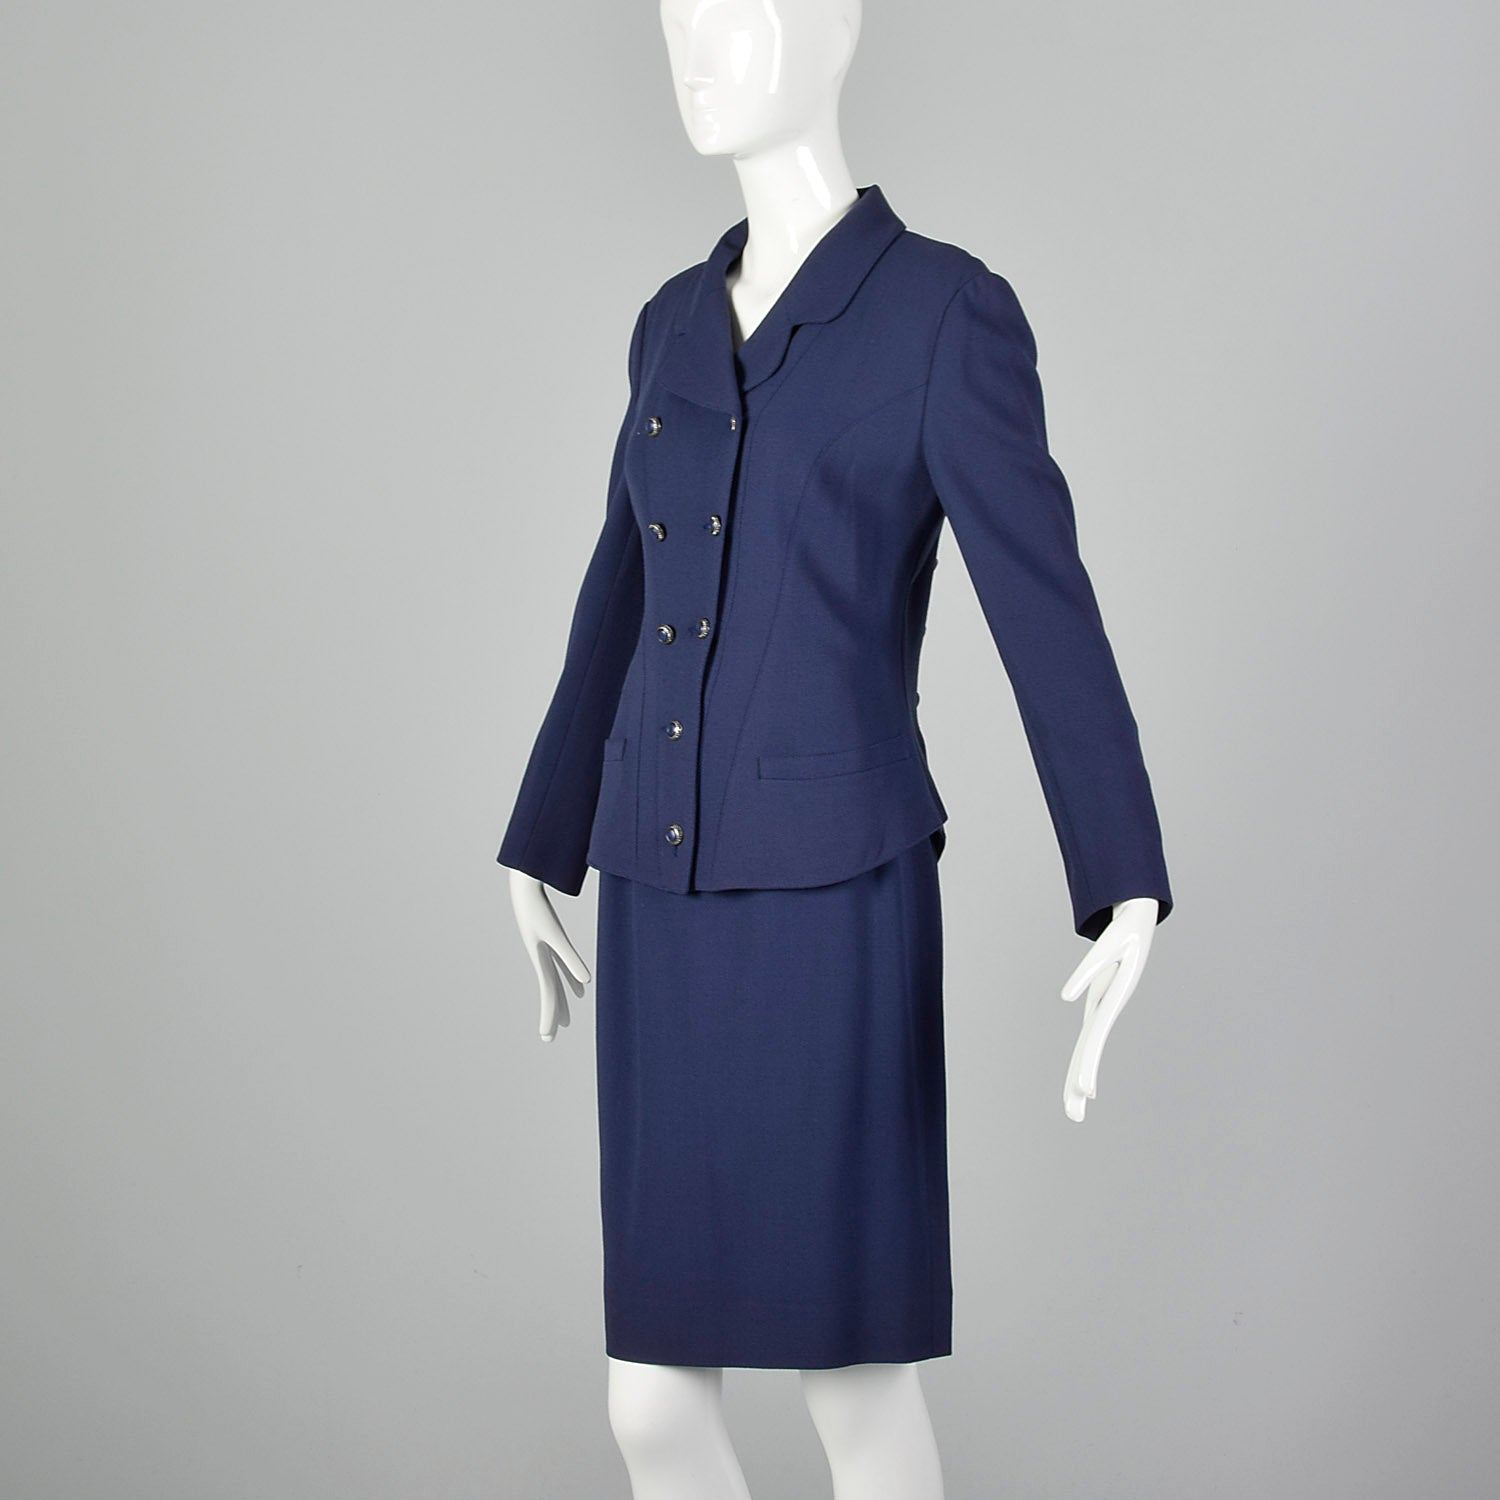 Small Karl Lagerfeld 1990s Blue Skirt Suit